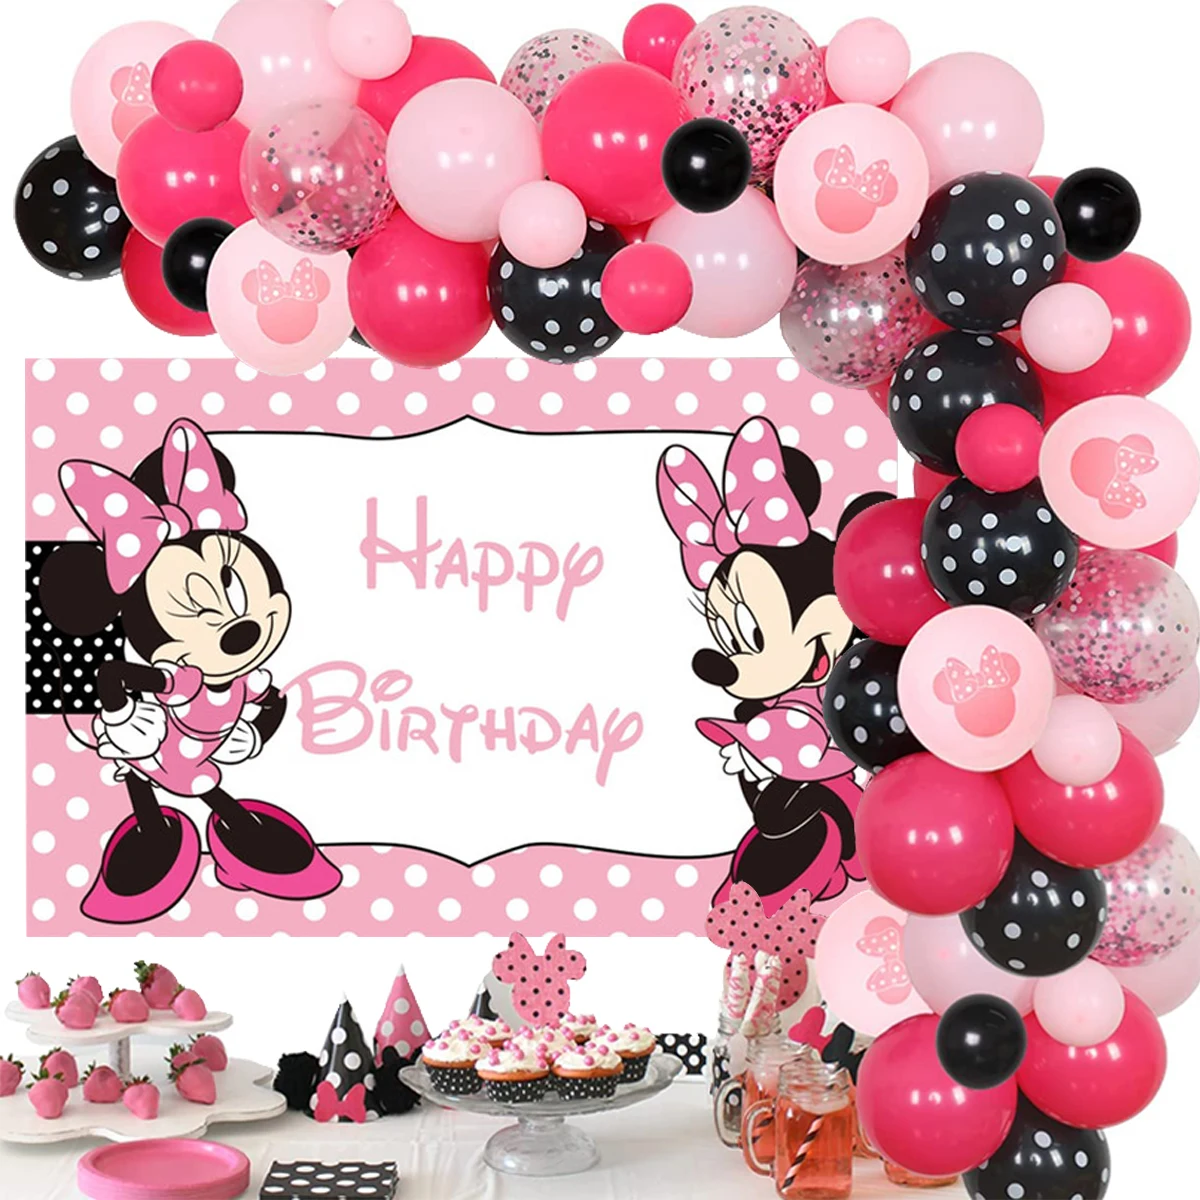 

Minnie Mouse Birthday Party Supplies Minnie Mouse Party Decorations for Girls 1st 2nd 3rd Birthday Decor Pink Balloons Gifts